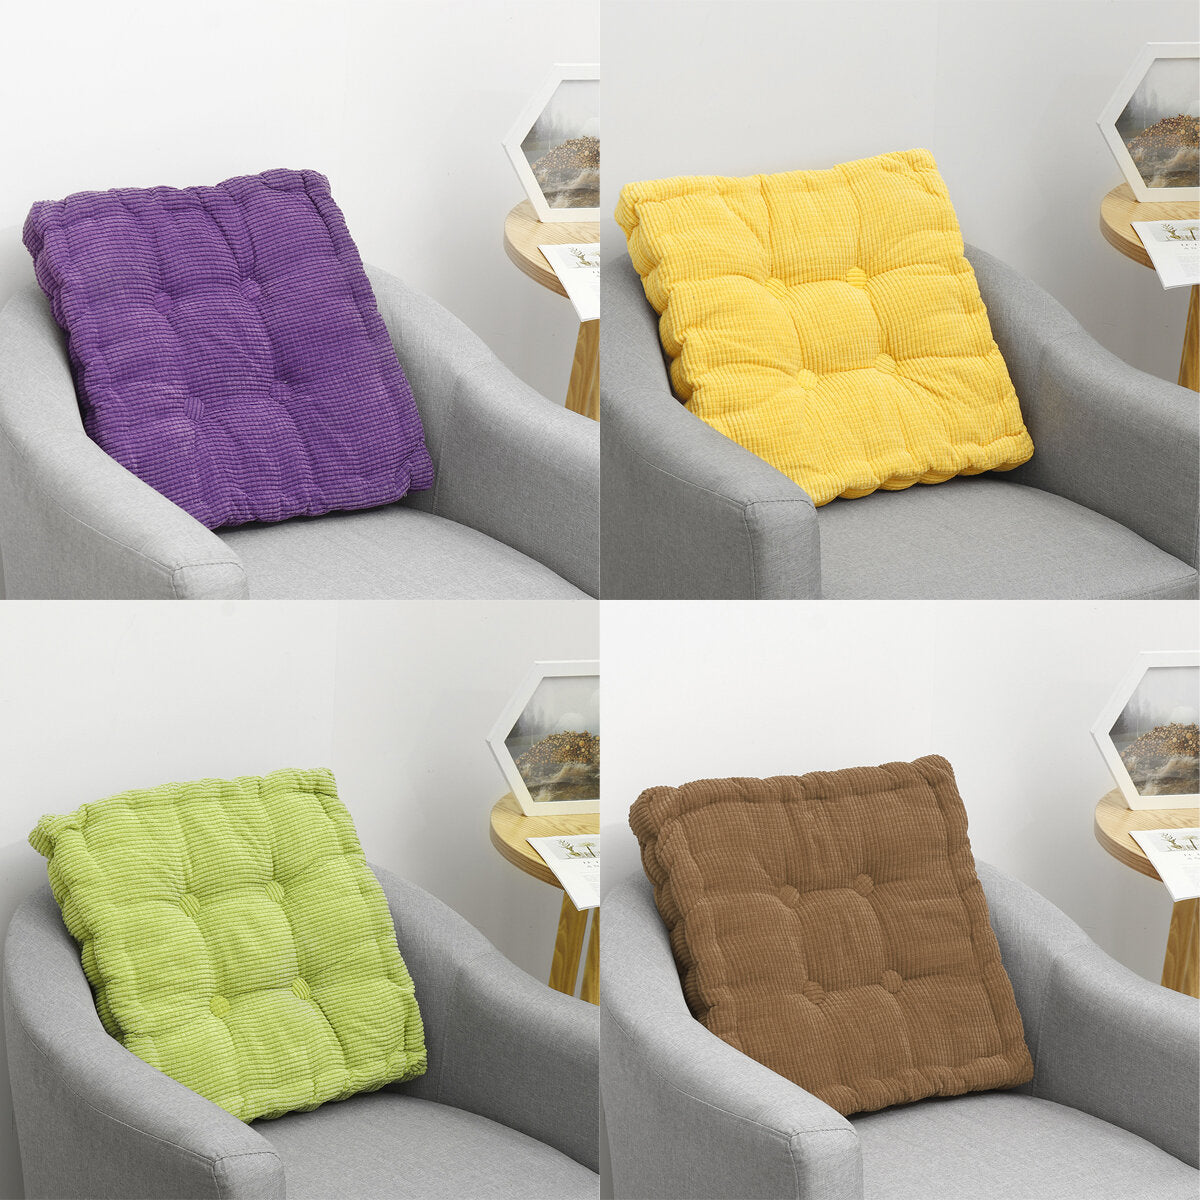 15x15 inch Anti Slip Soft Square Cotton Chair Seat Cushion Pillow Mat Pads Buttocks for Kitchen Chairs Home Office Decor